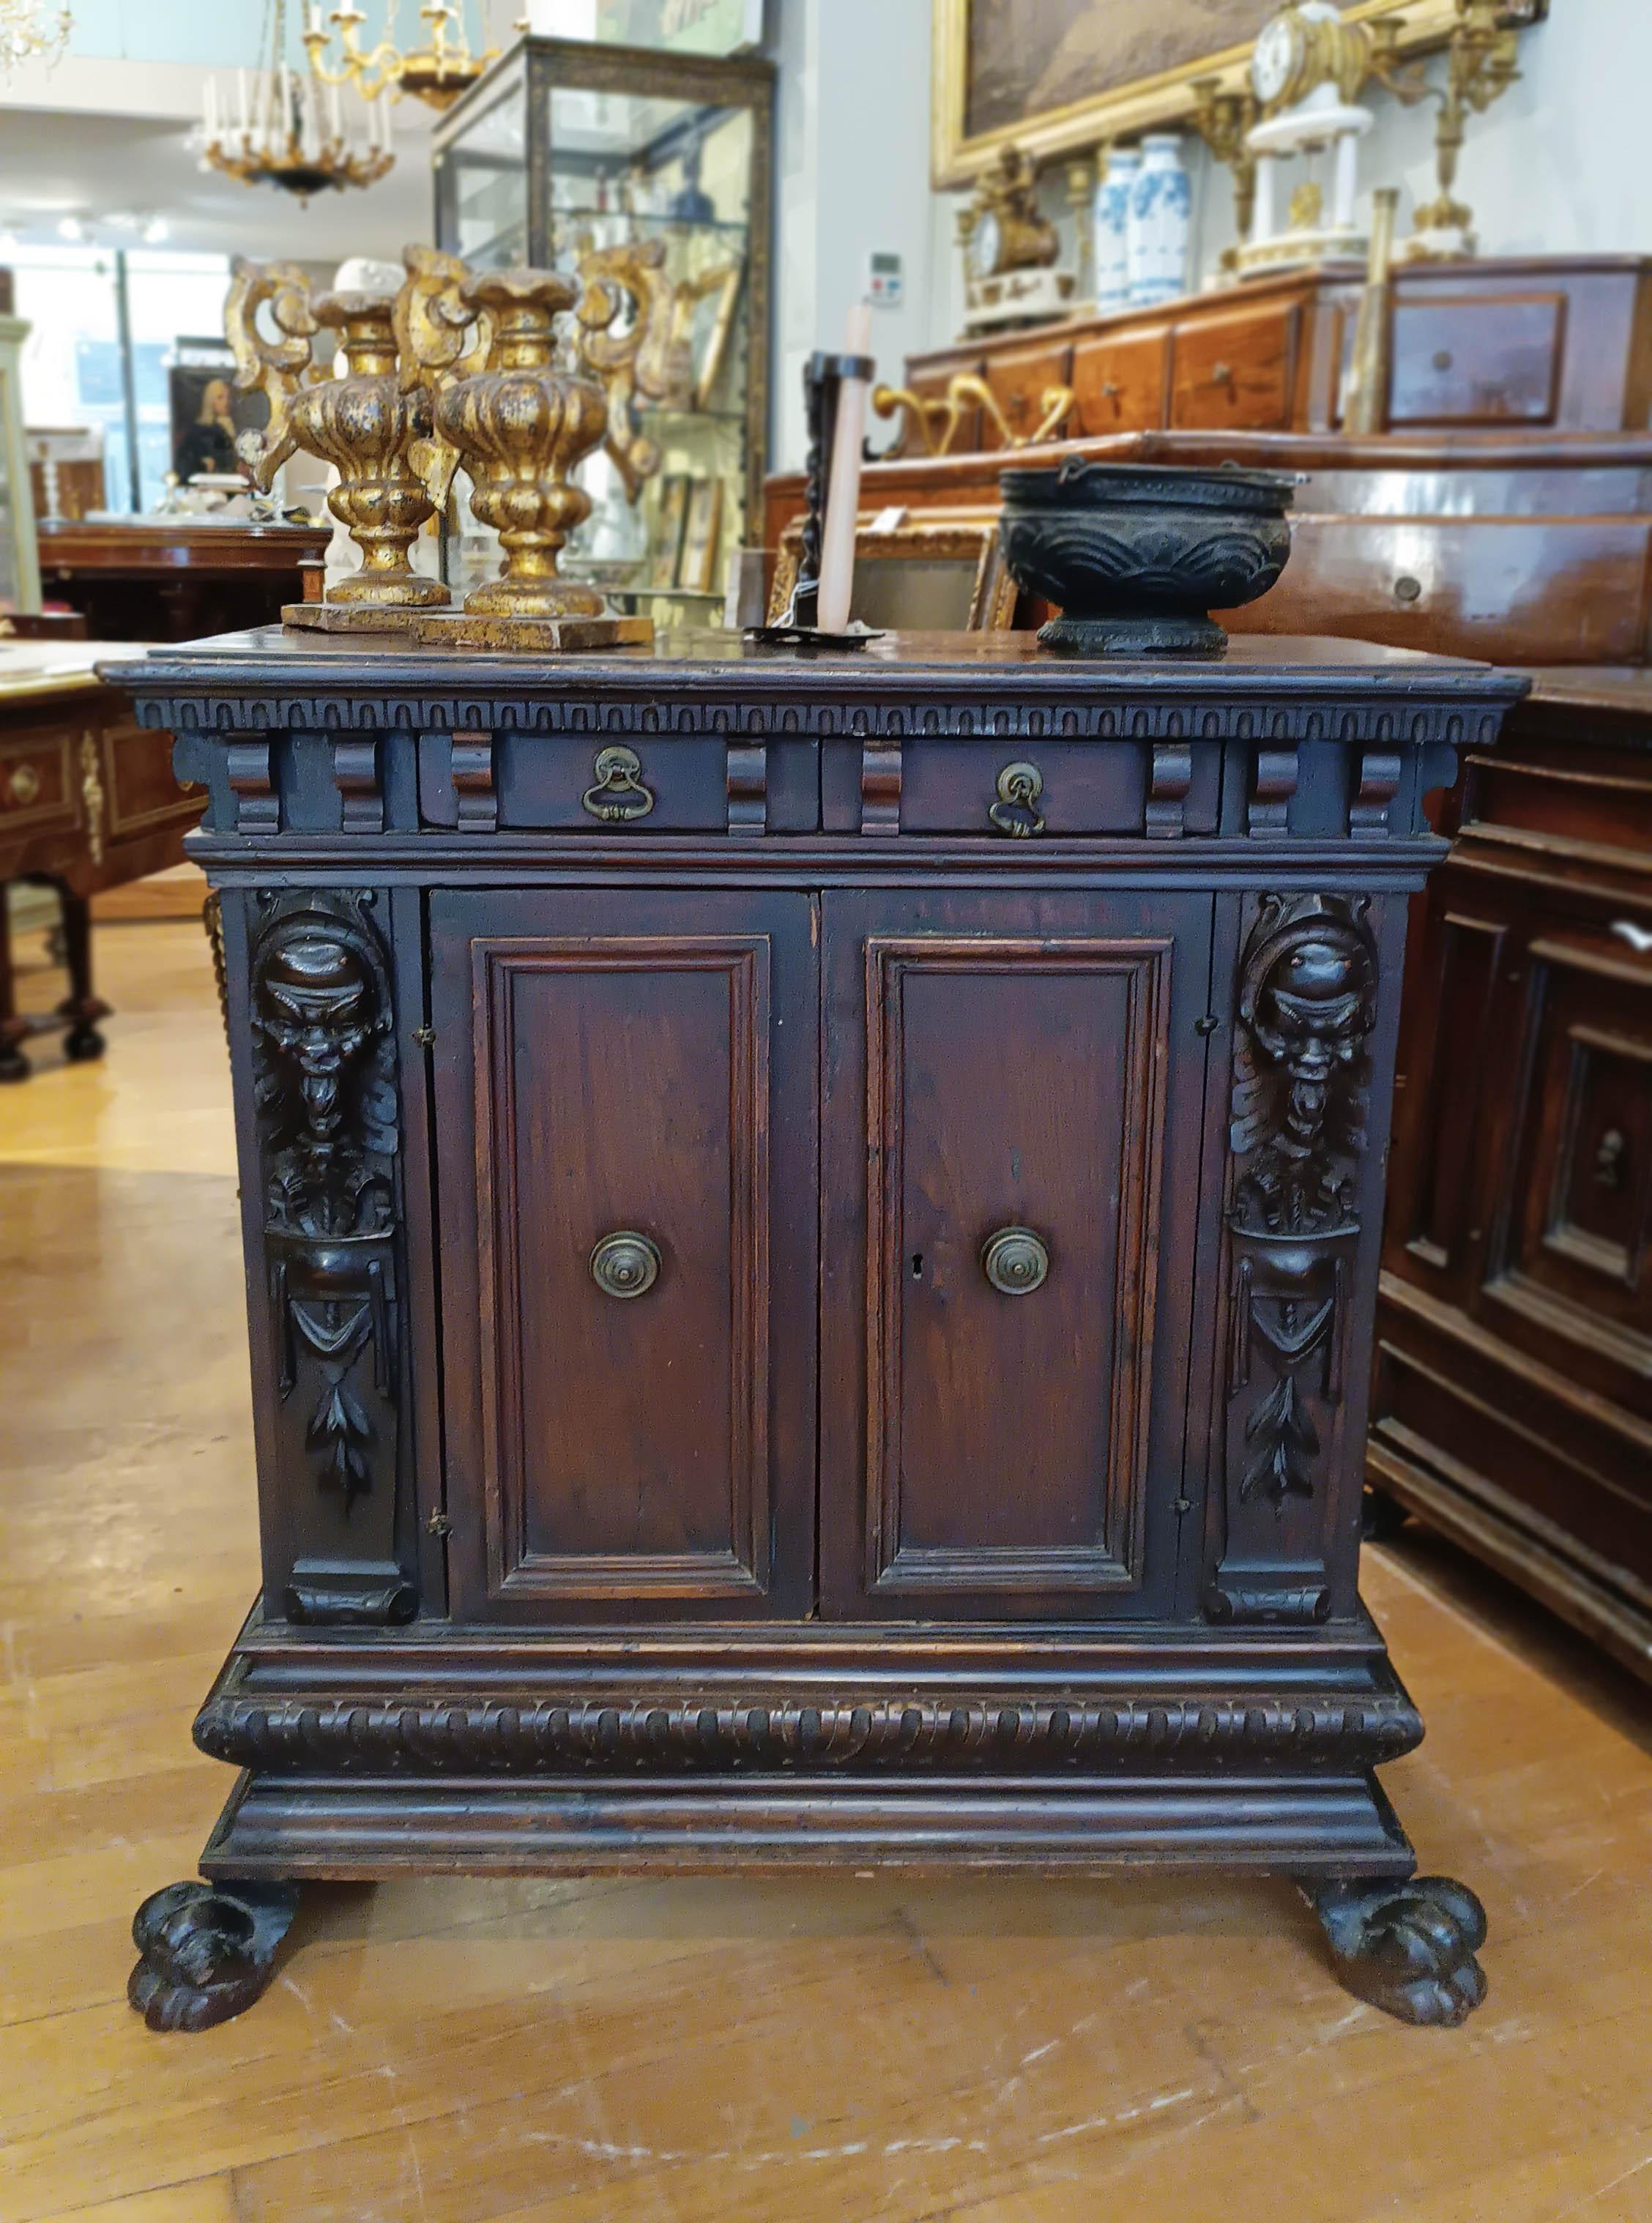 16th CENTURY RENAISSANCE SMALL SIDEBOARD IN SOLID WALNUT For Sale 2